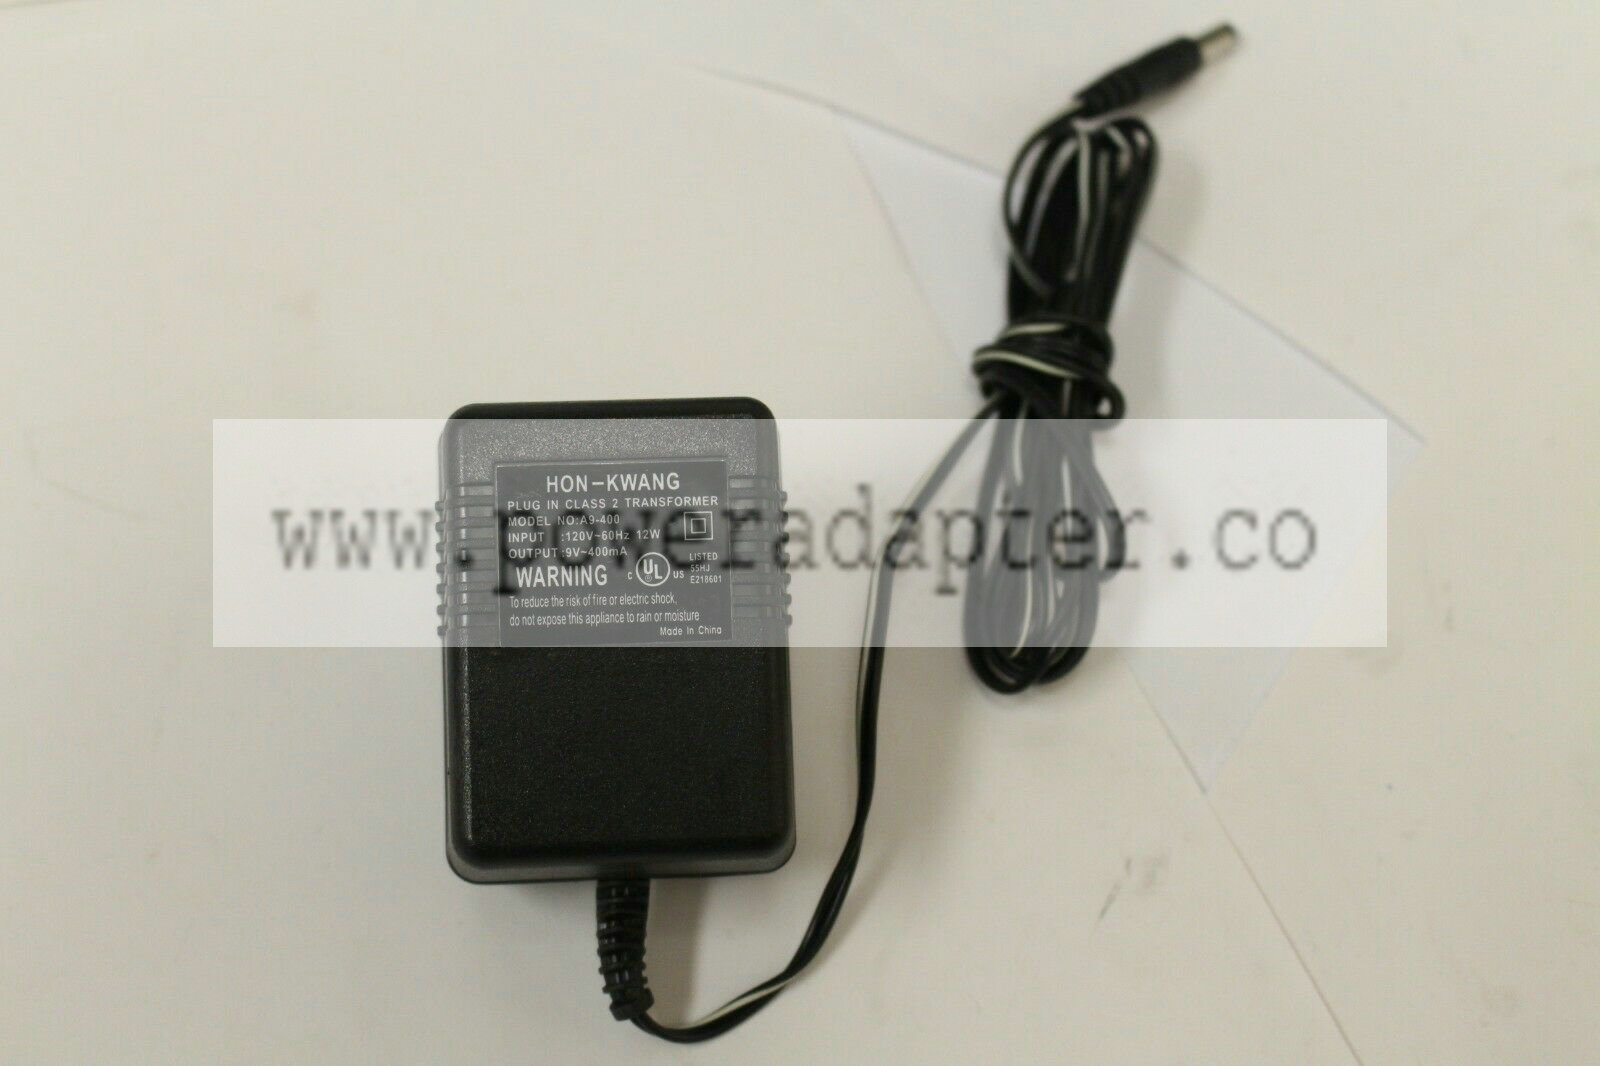 Hon-Kwang A9-400 Plug-In Power Cord Class 2 AC Transformer Adapter 9V Black Model: A9-400 Output Voltage: 9V Countr